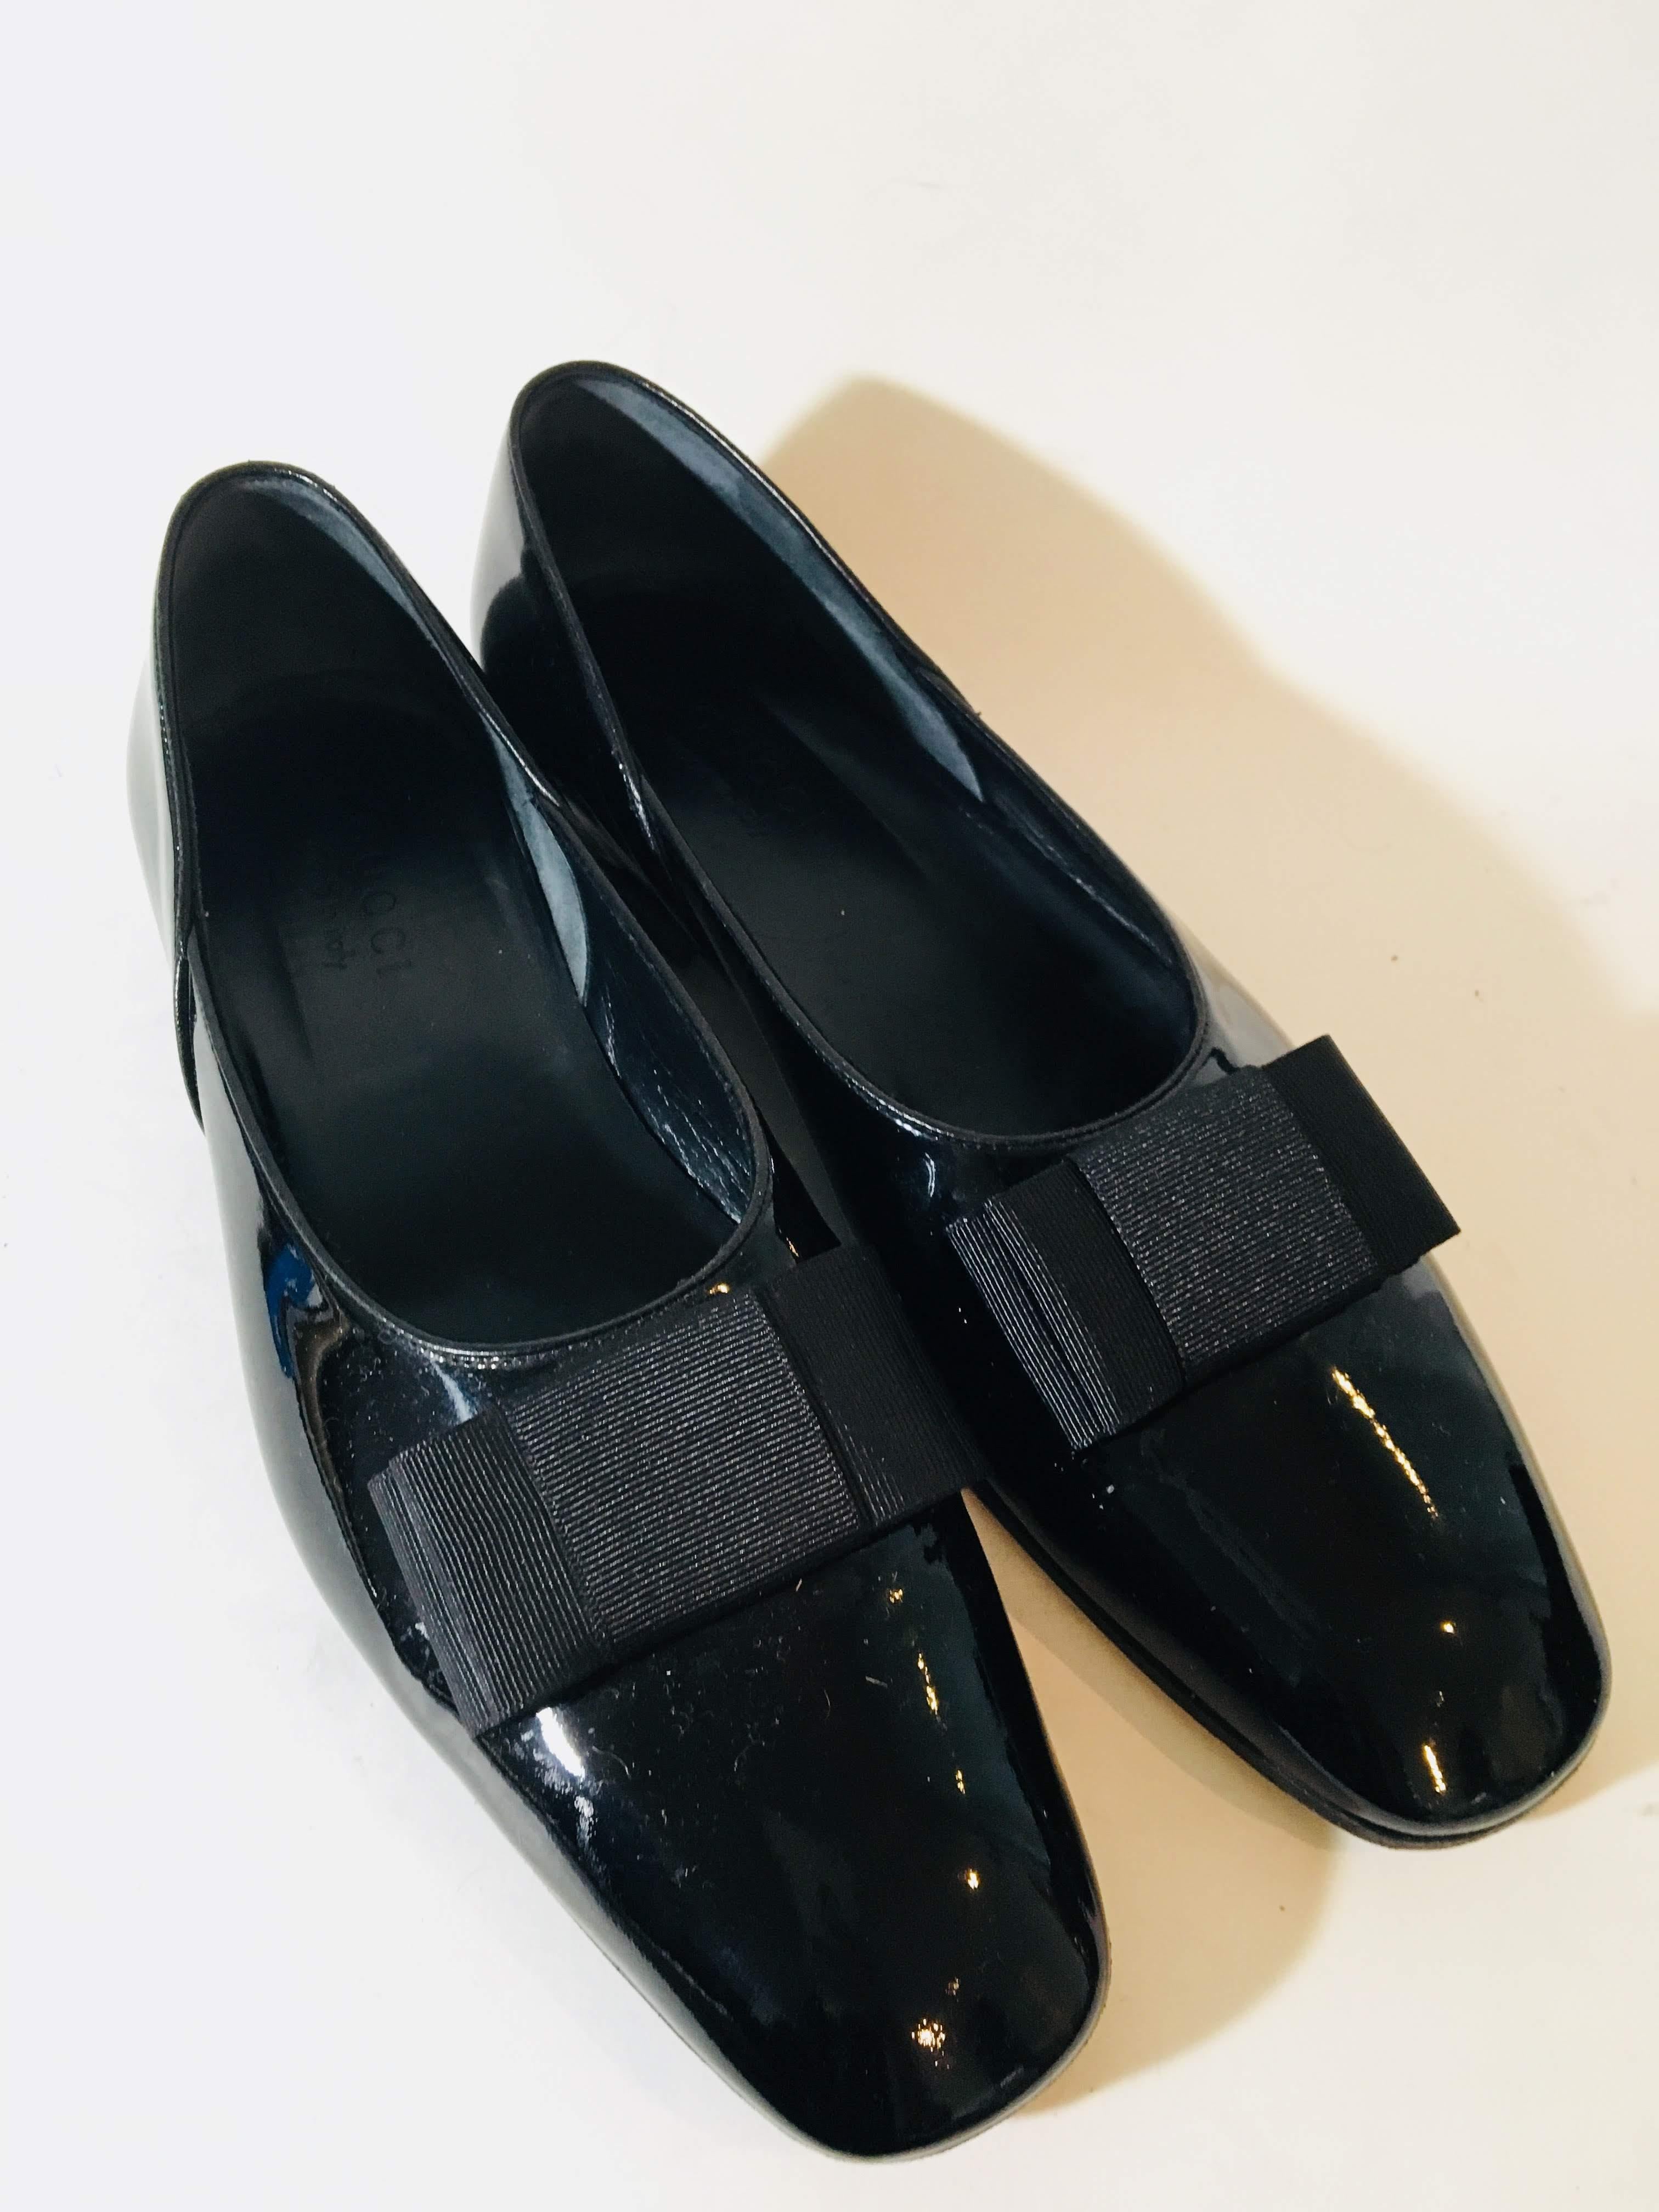 Patent Leather Gucci Loafers in size US 8.5 with Ribbon Bow Detail at Toe. Semi-Round Toe.